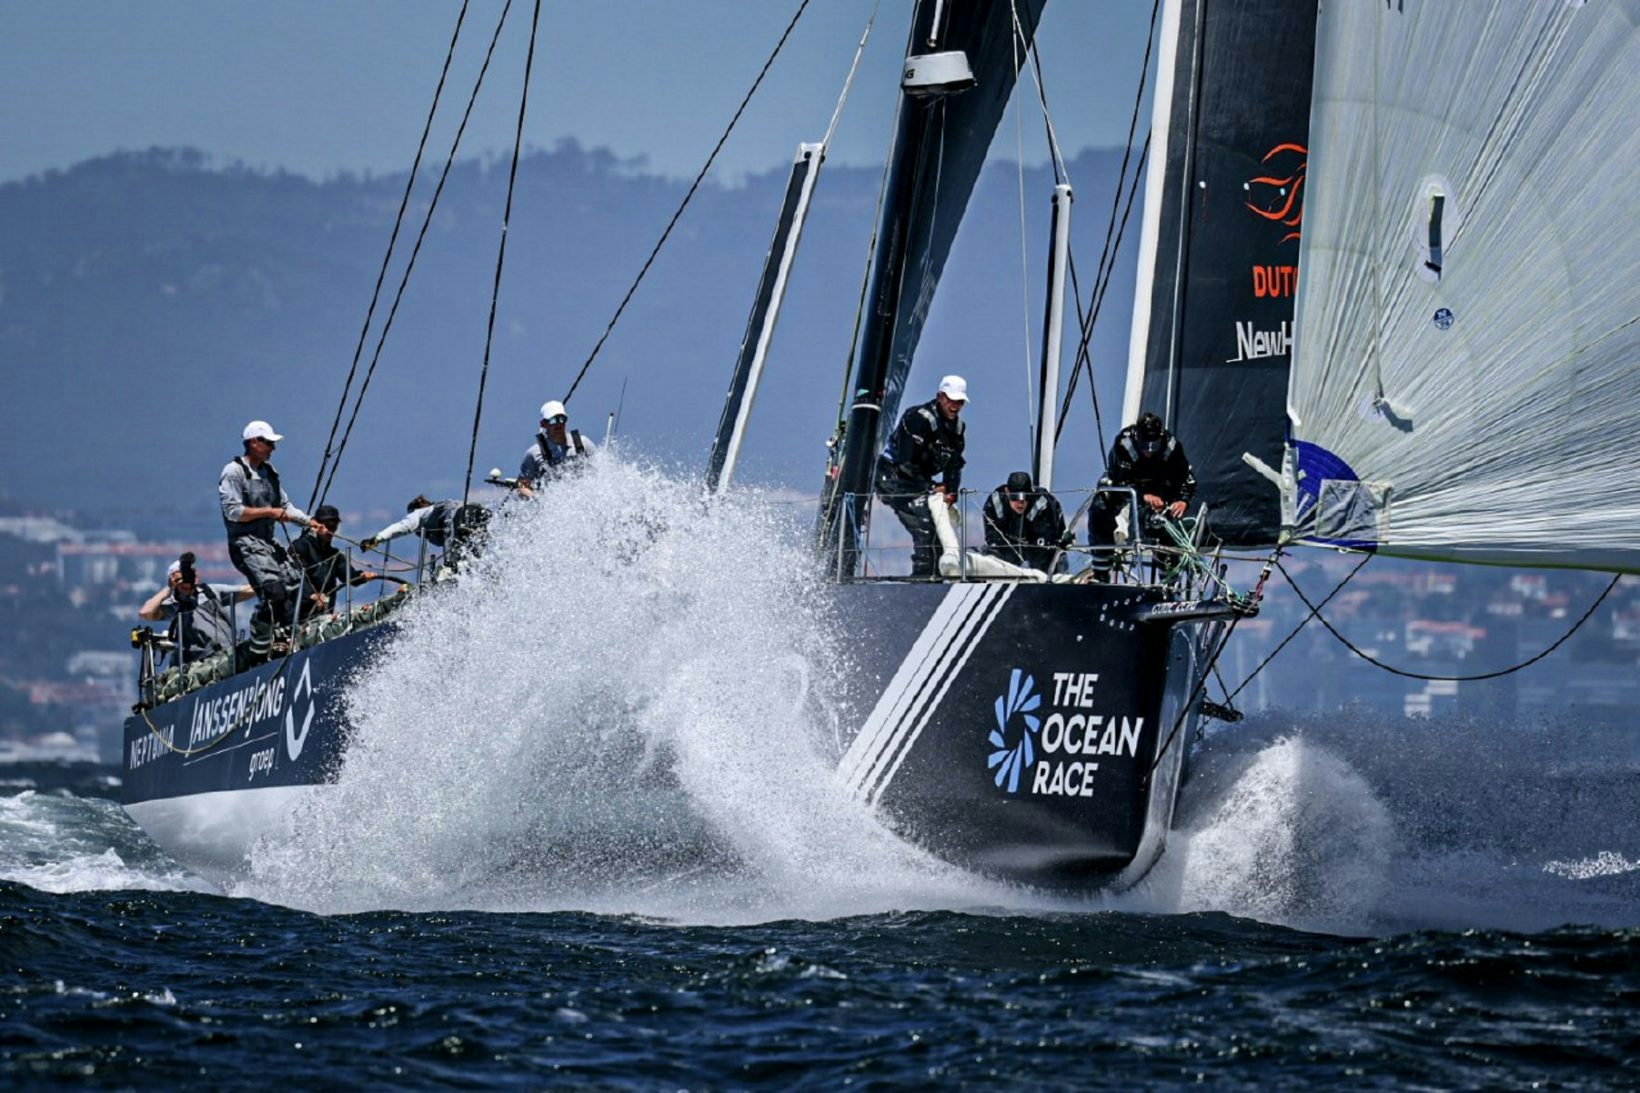 The Ocean Race, the sailing race that will change Genoa